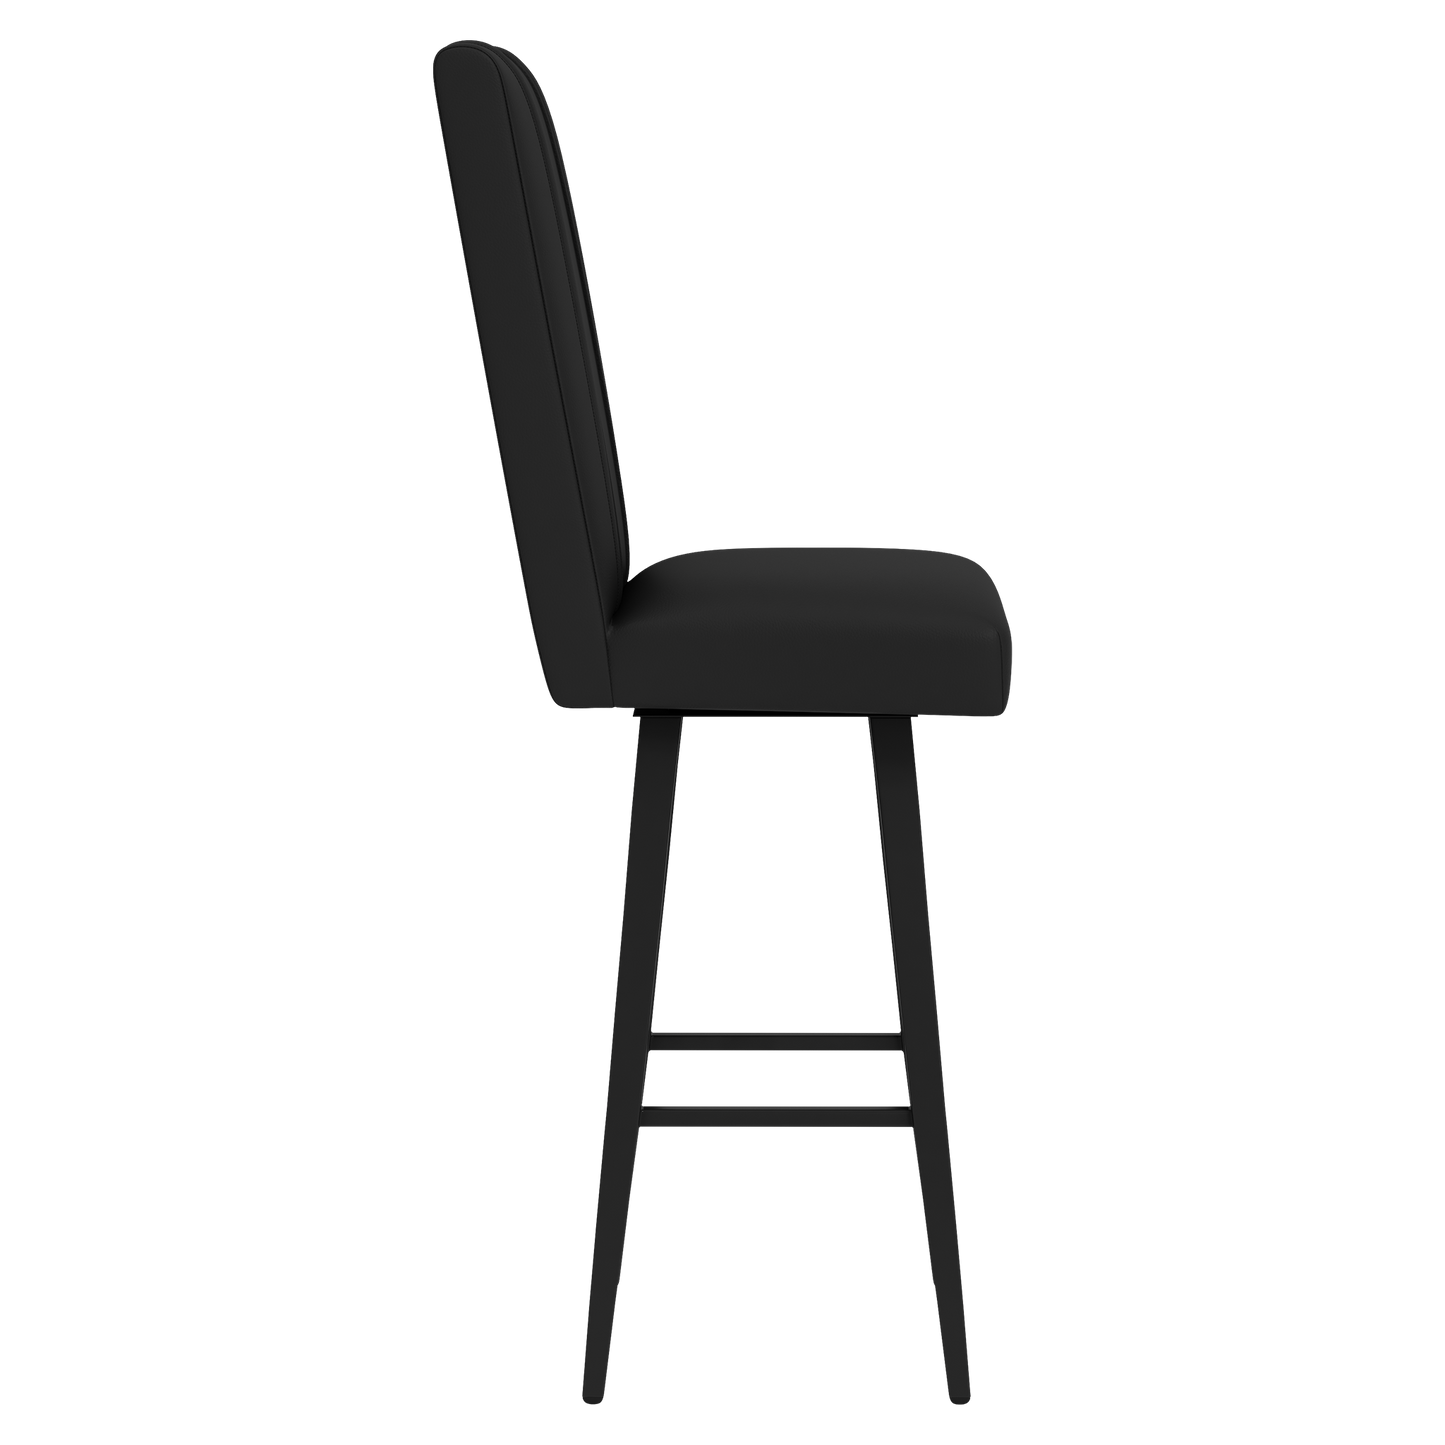 Swivel Bar Stool 2000 with St Louis Cardinals Secondary